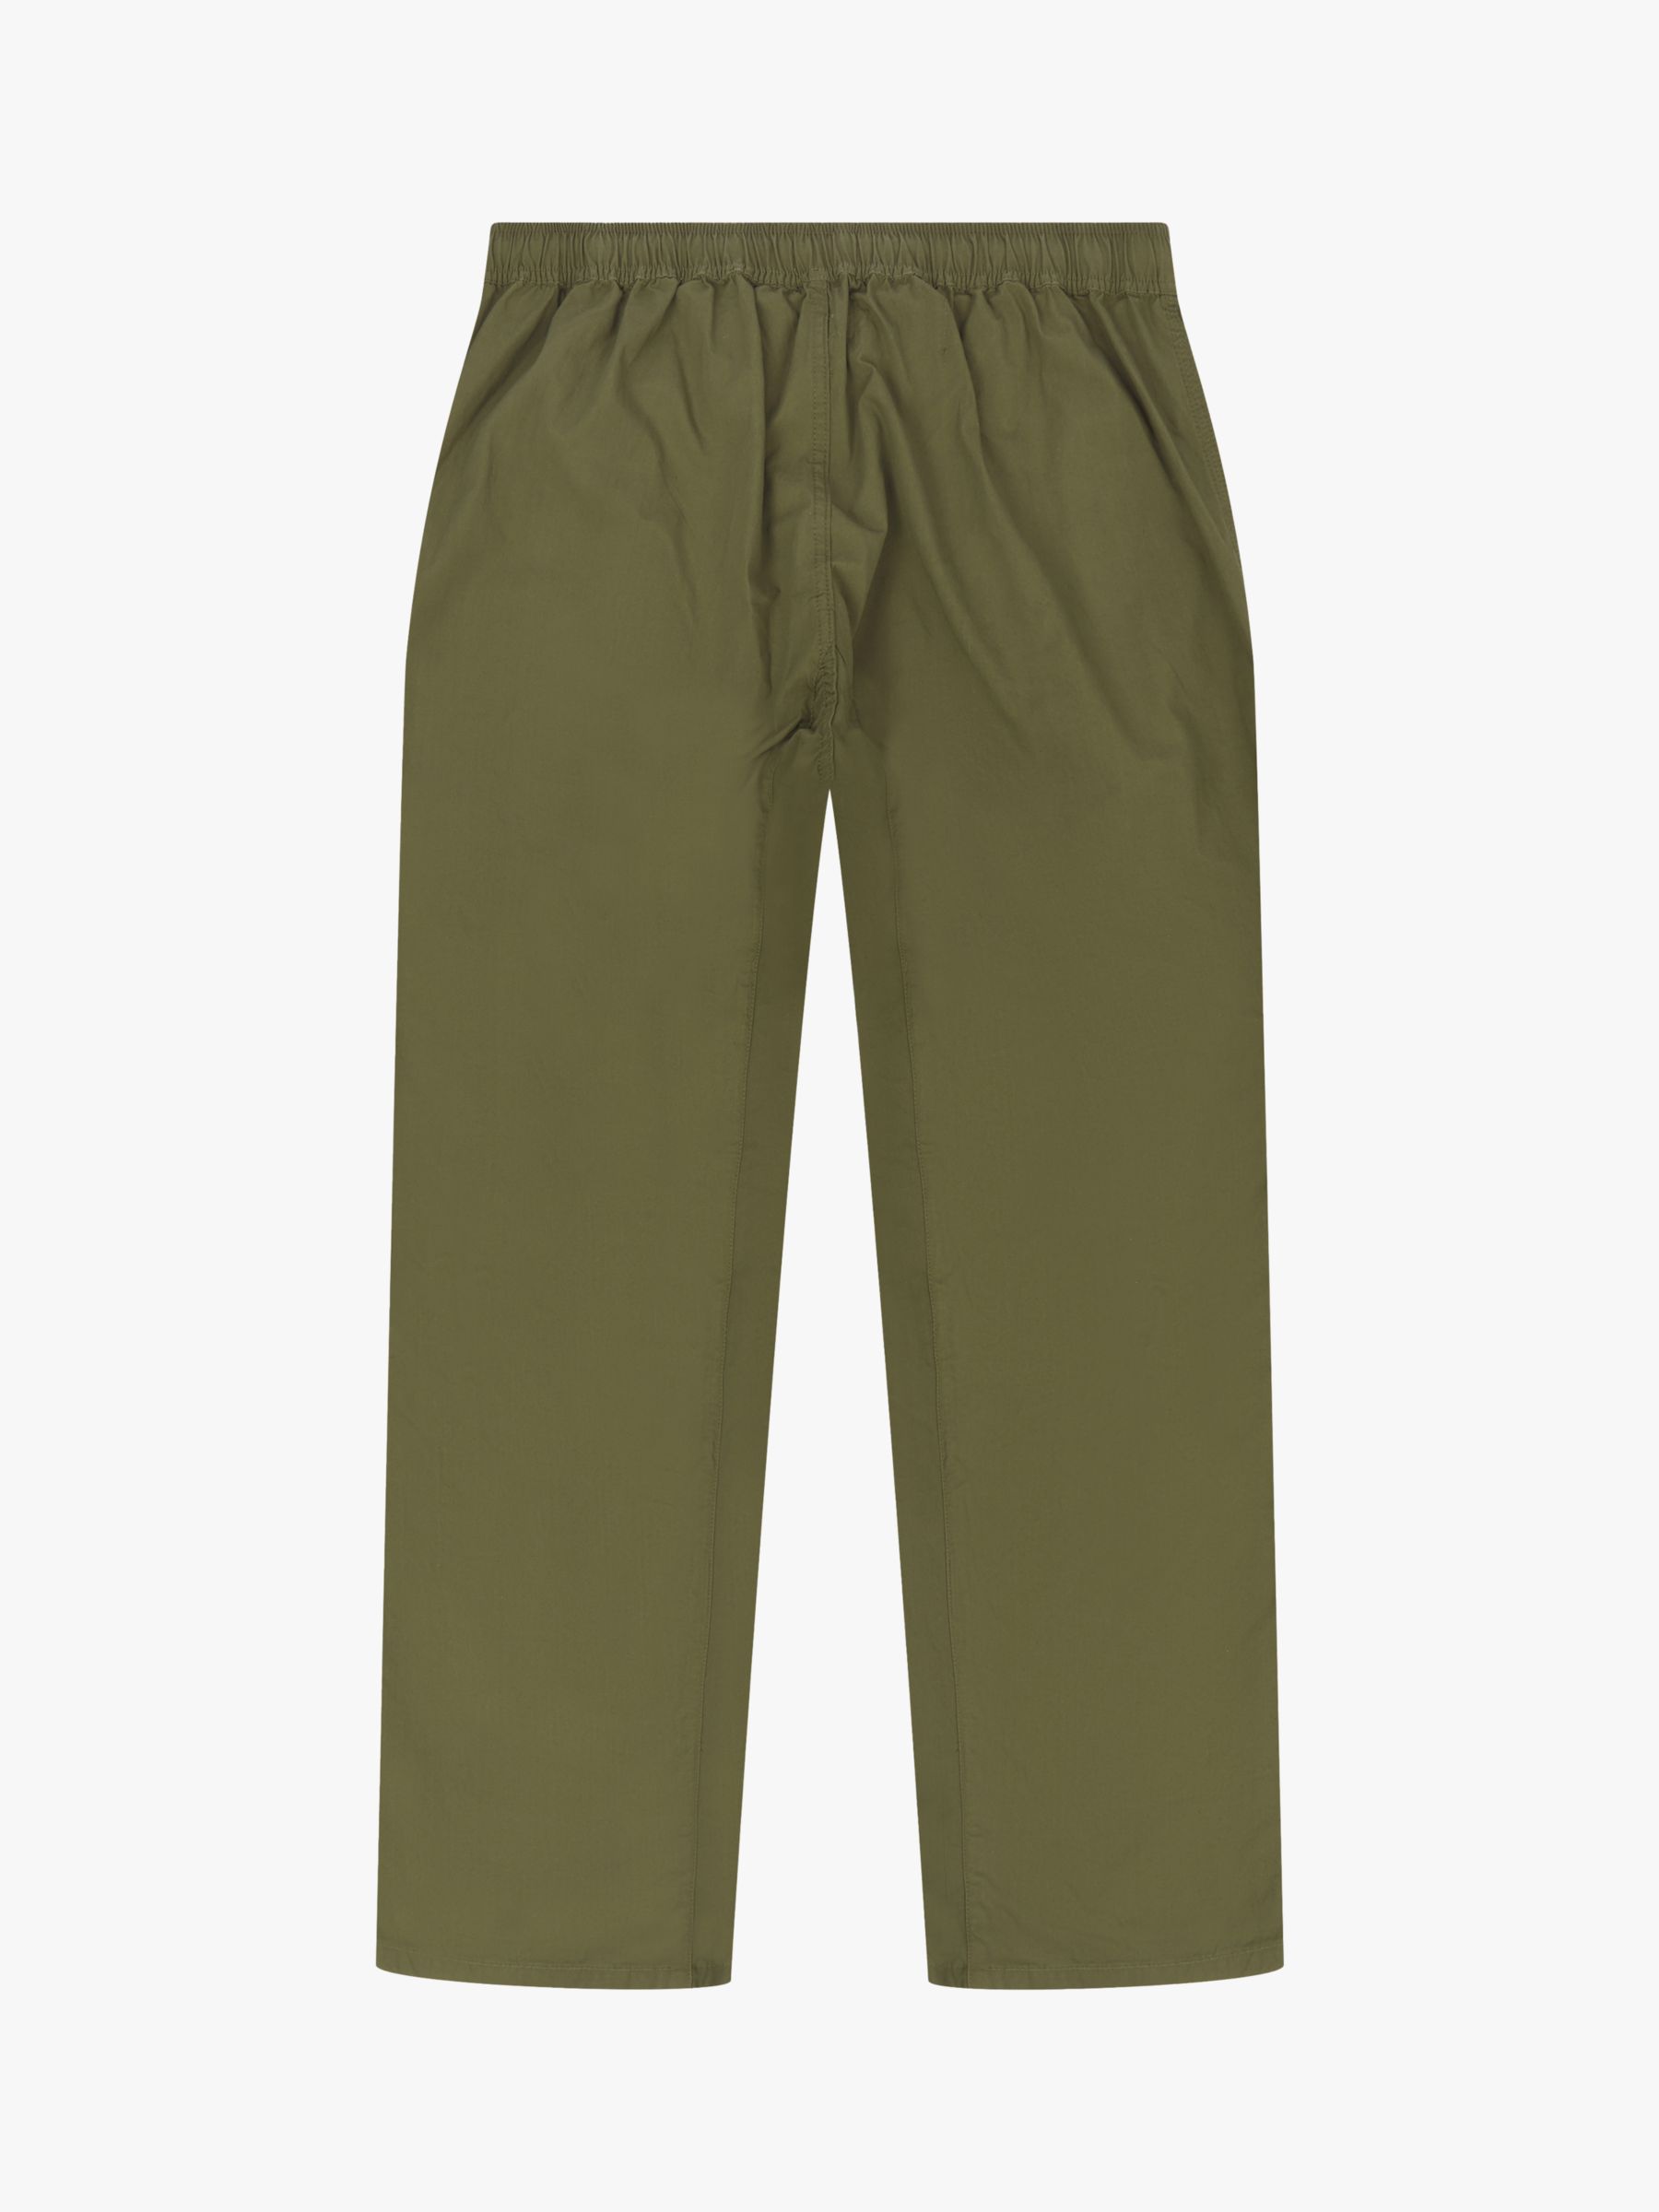 Uskees Lightweight Trousers, Olive, 34R